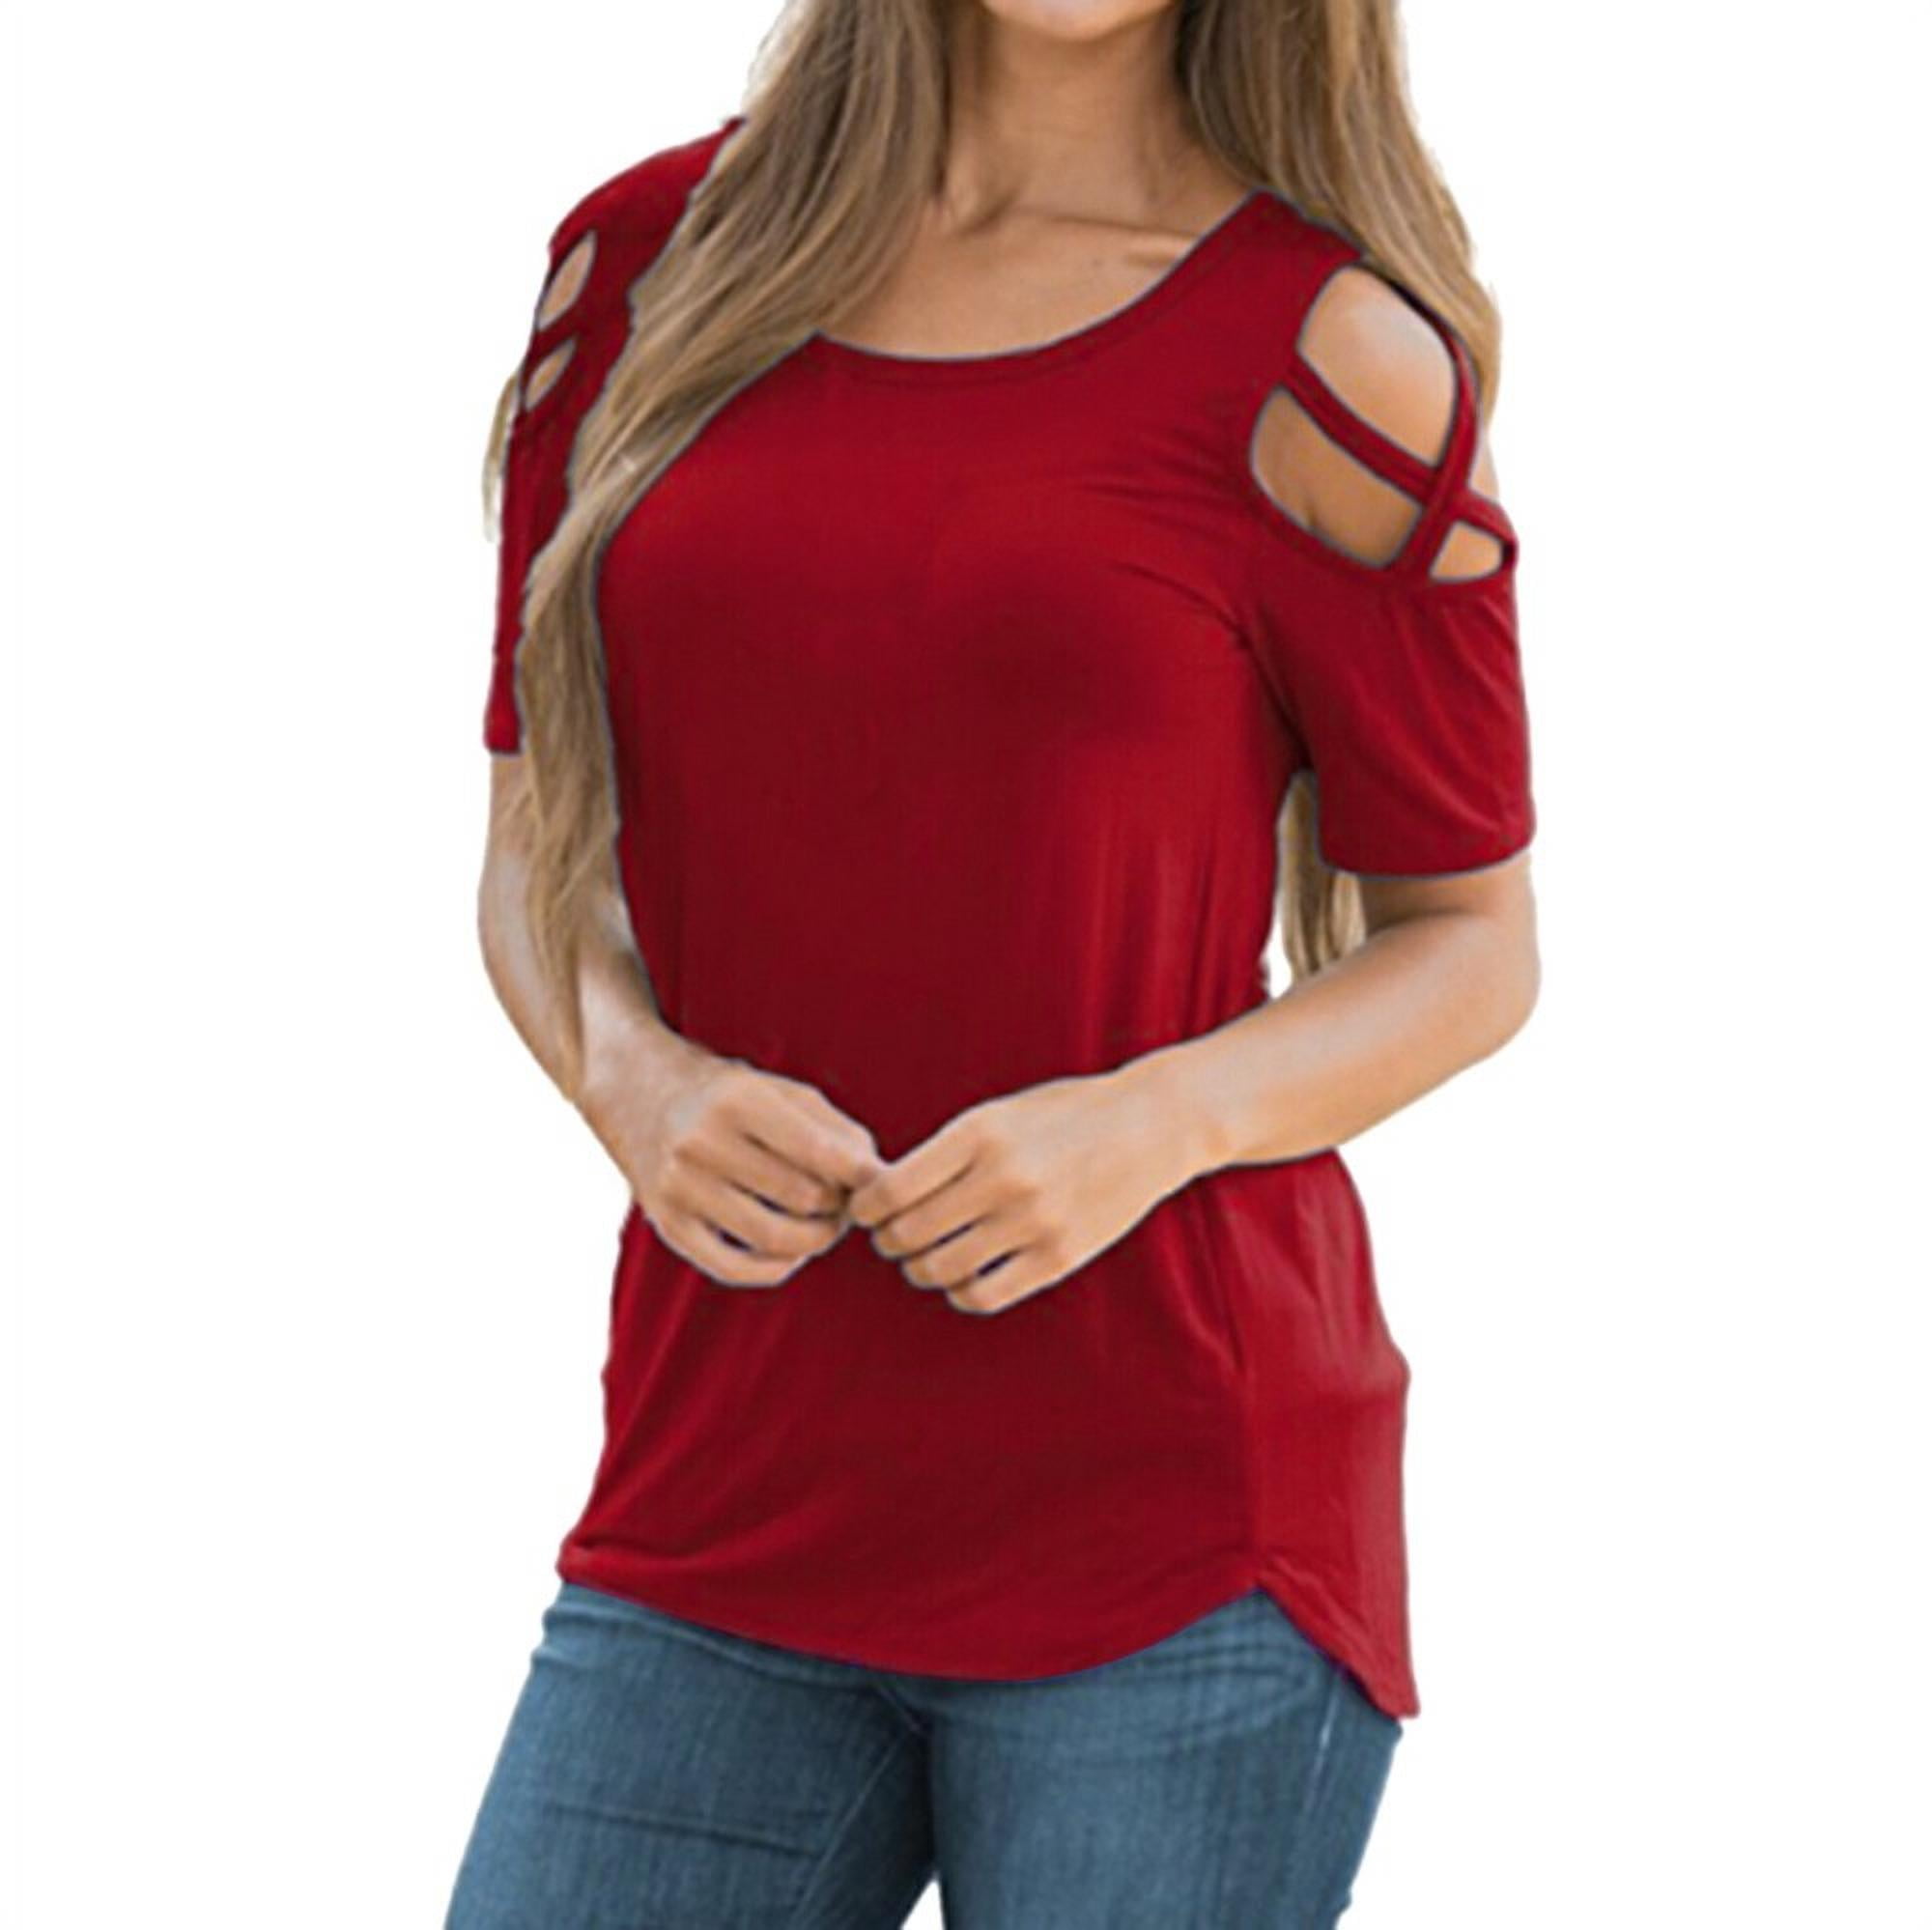 Fashion Tops Strappy Tops Style Strappy Top red casual look 